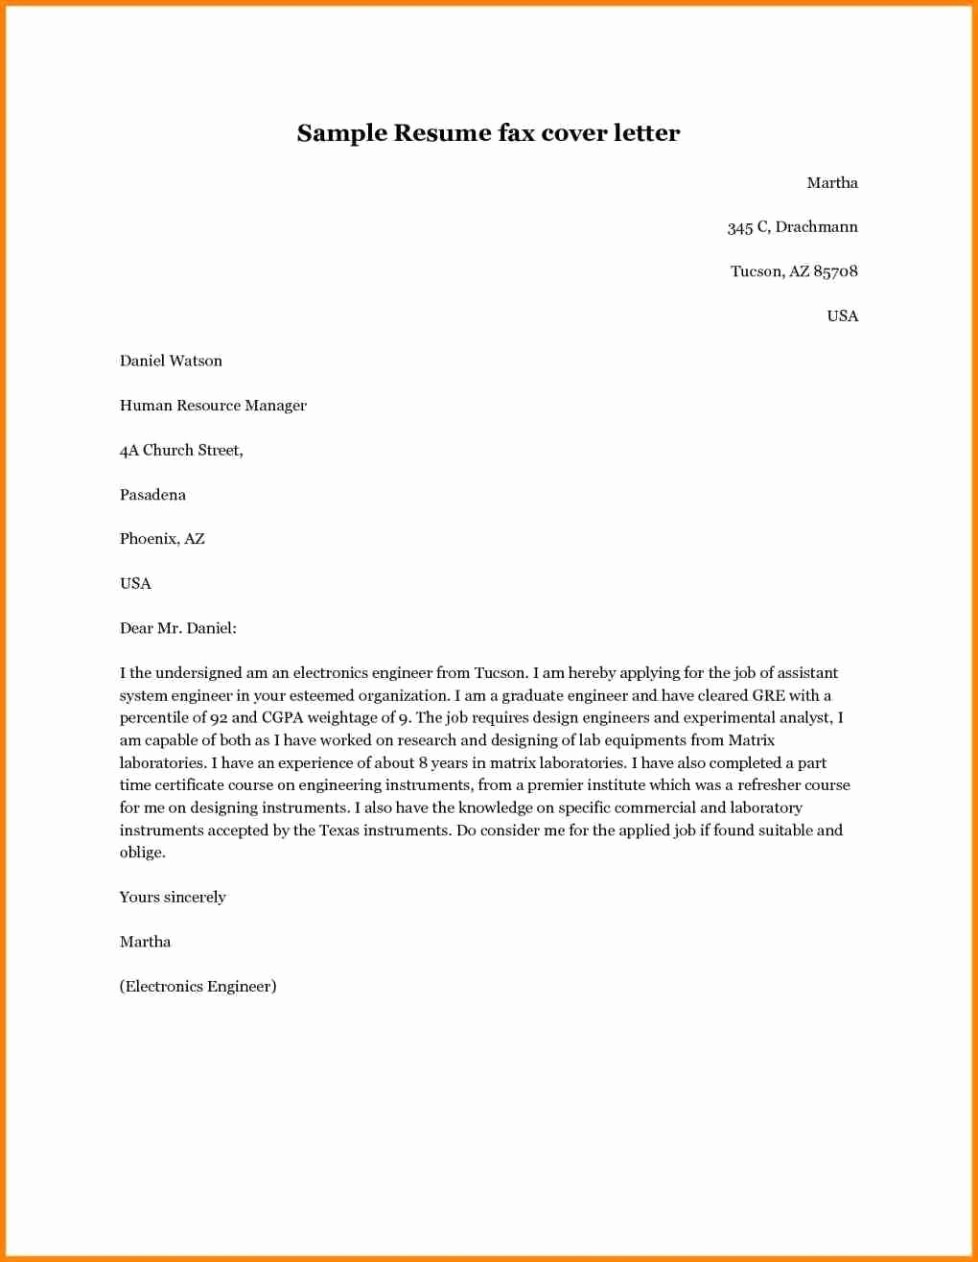 Sample Of Fax Cover Letter New Email Body for Resume Cover Letter Samples Cover